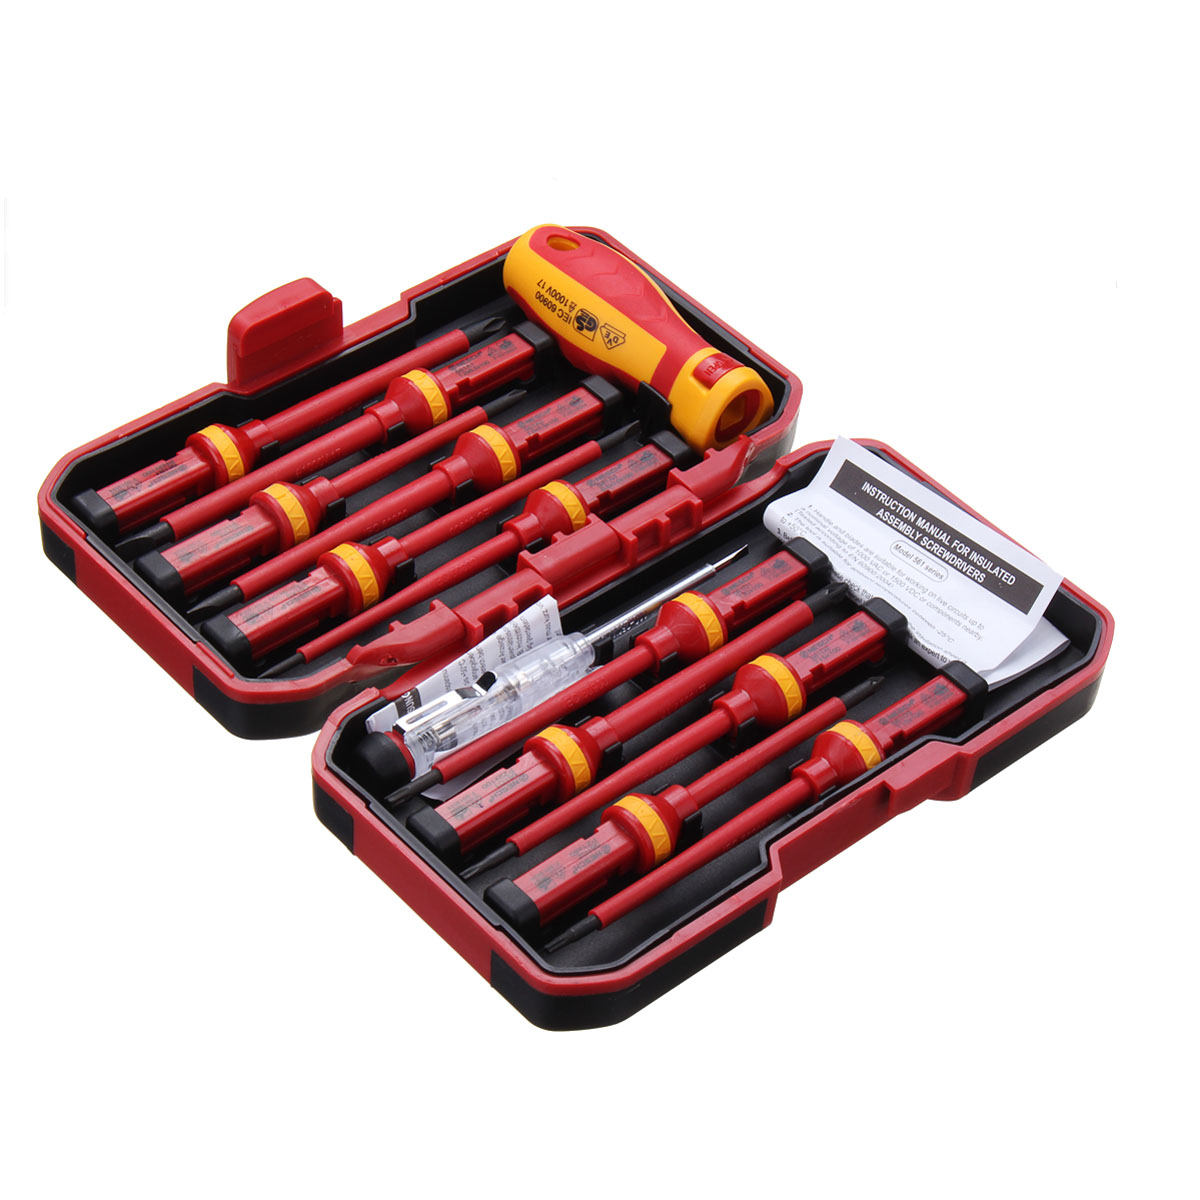 13Pcs 1000V Electronic Insulated Screwdriver Set Phillips Slotted Torx CR-V Screwdriver Repair Tools 17